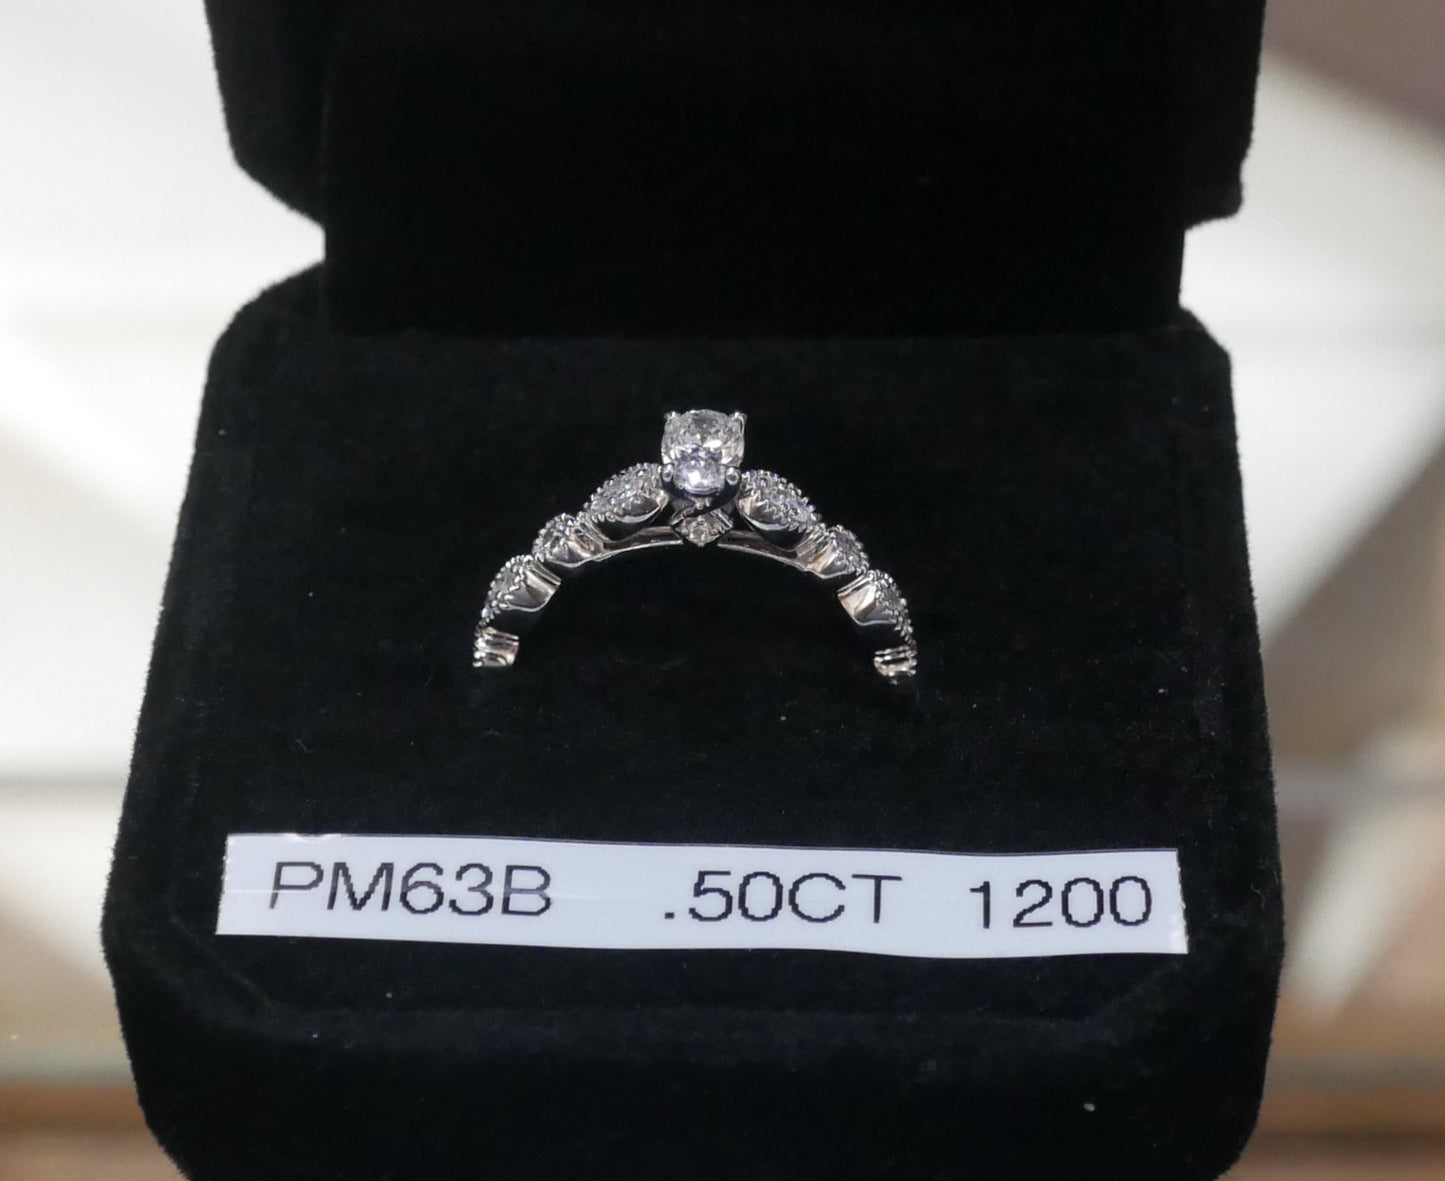 Ornate Diamond Ring with Decorative Band